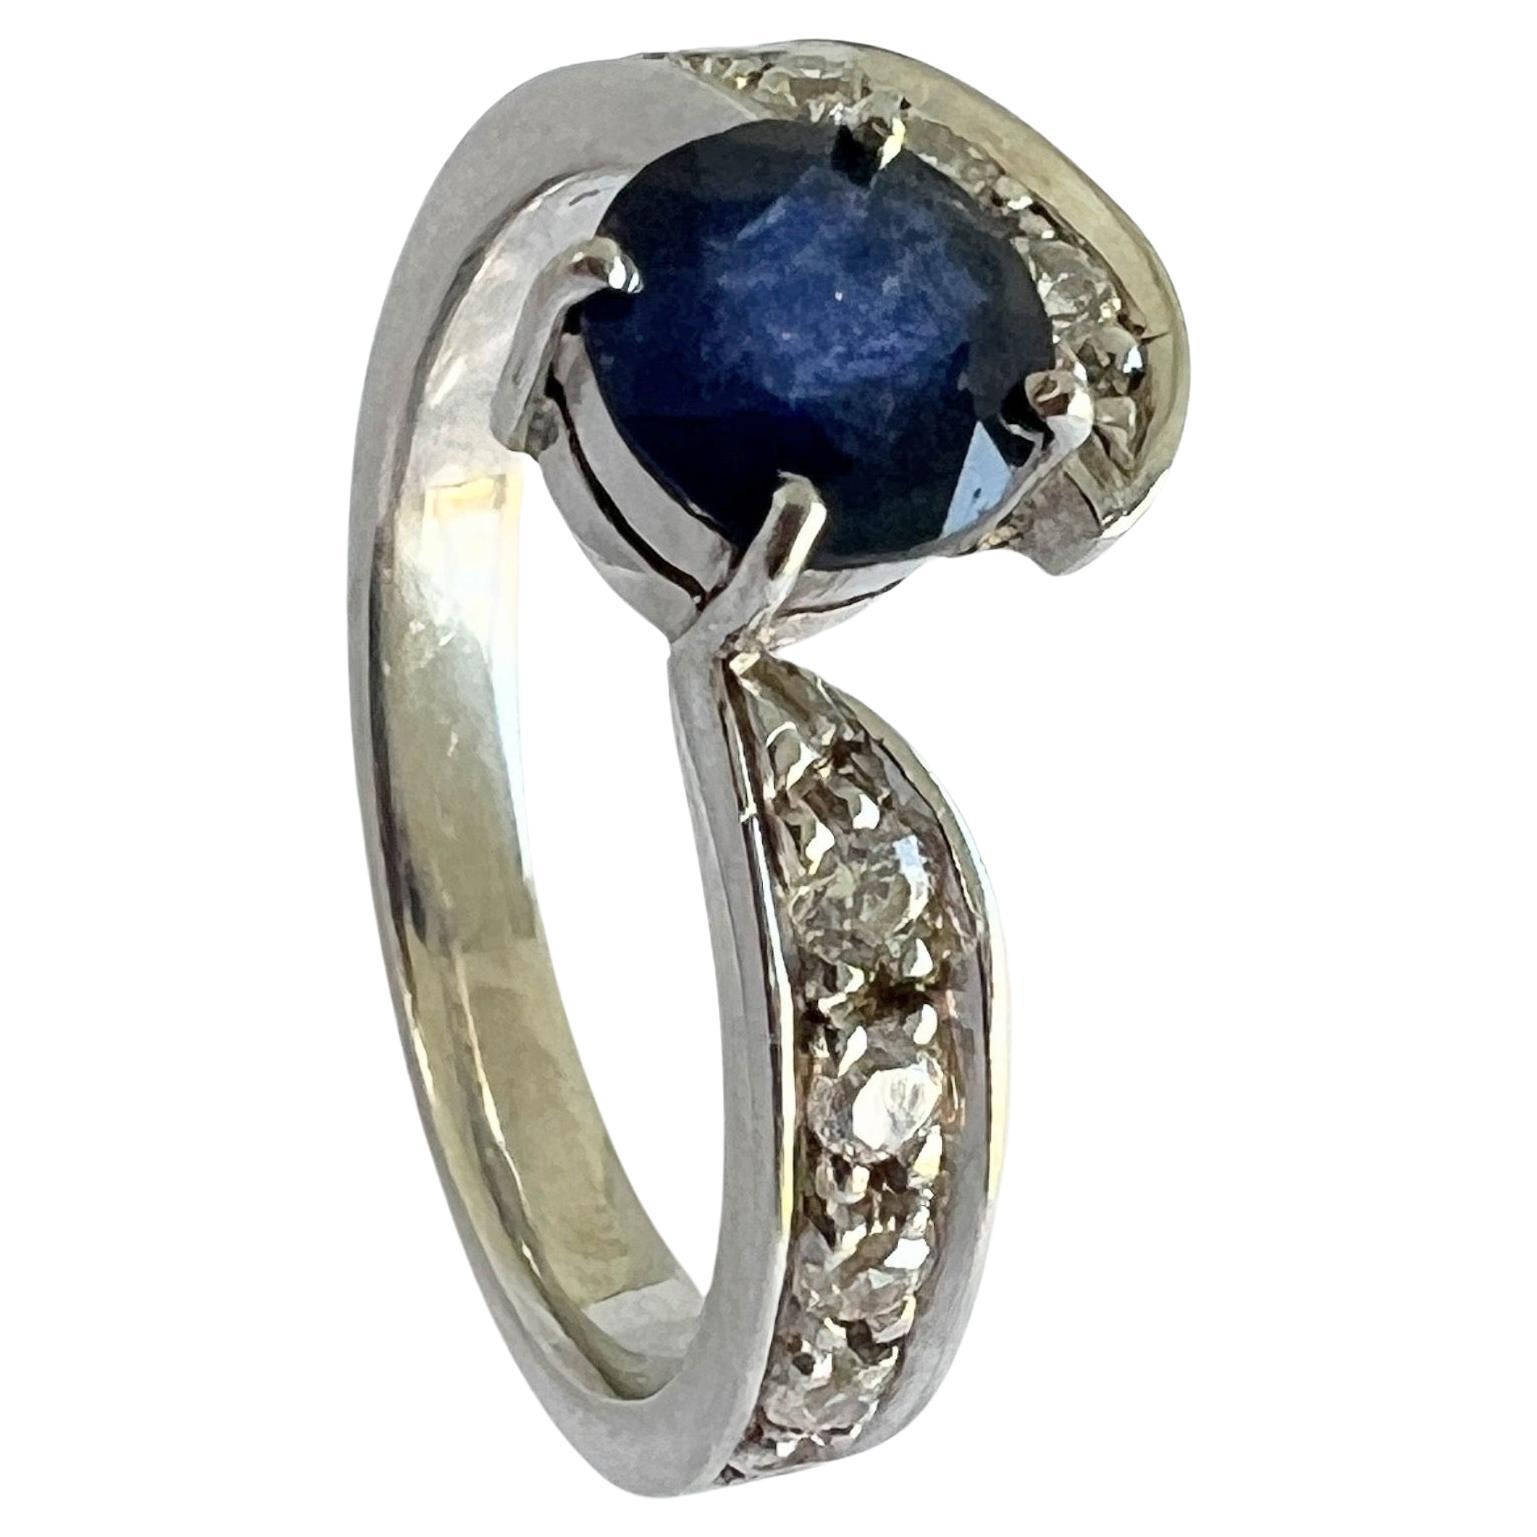 NO RESERVE 1ct BLUE AND WHITE SAPPHIRE Ring im Angebot